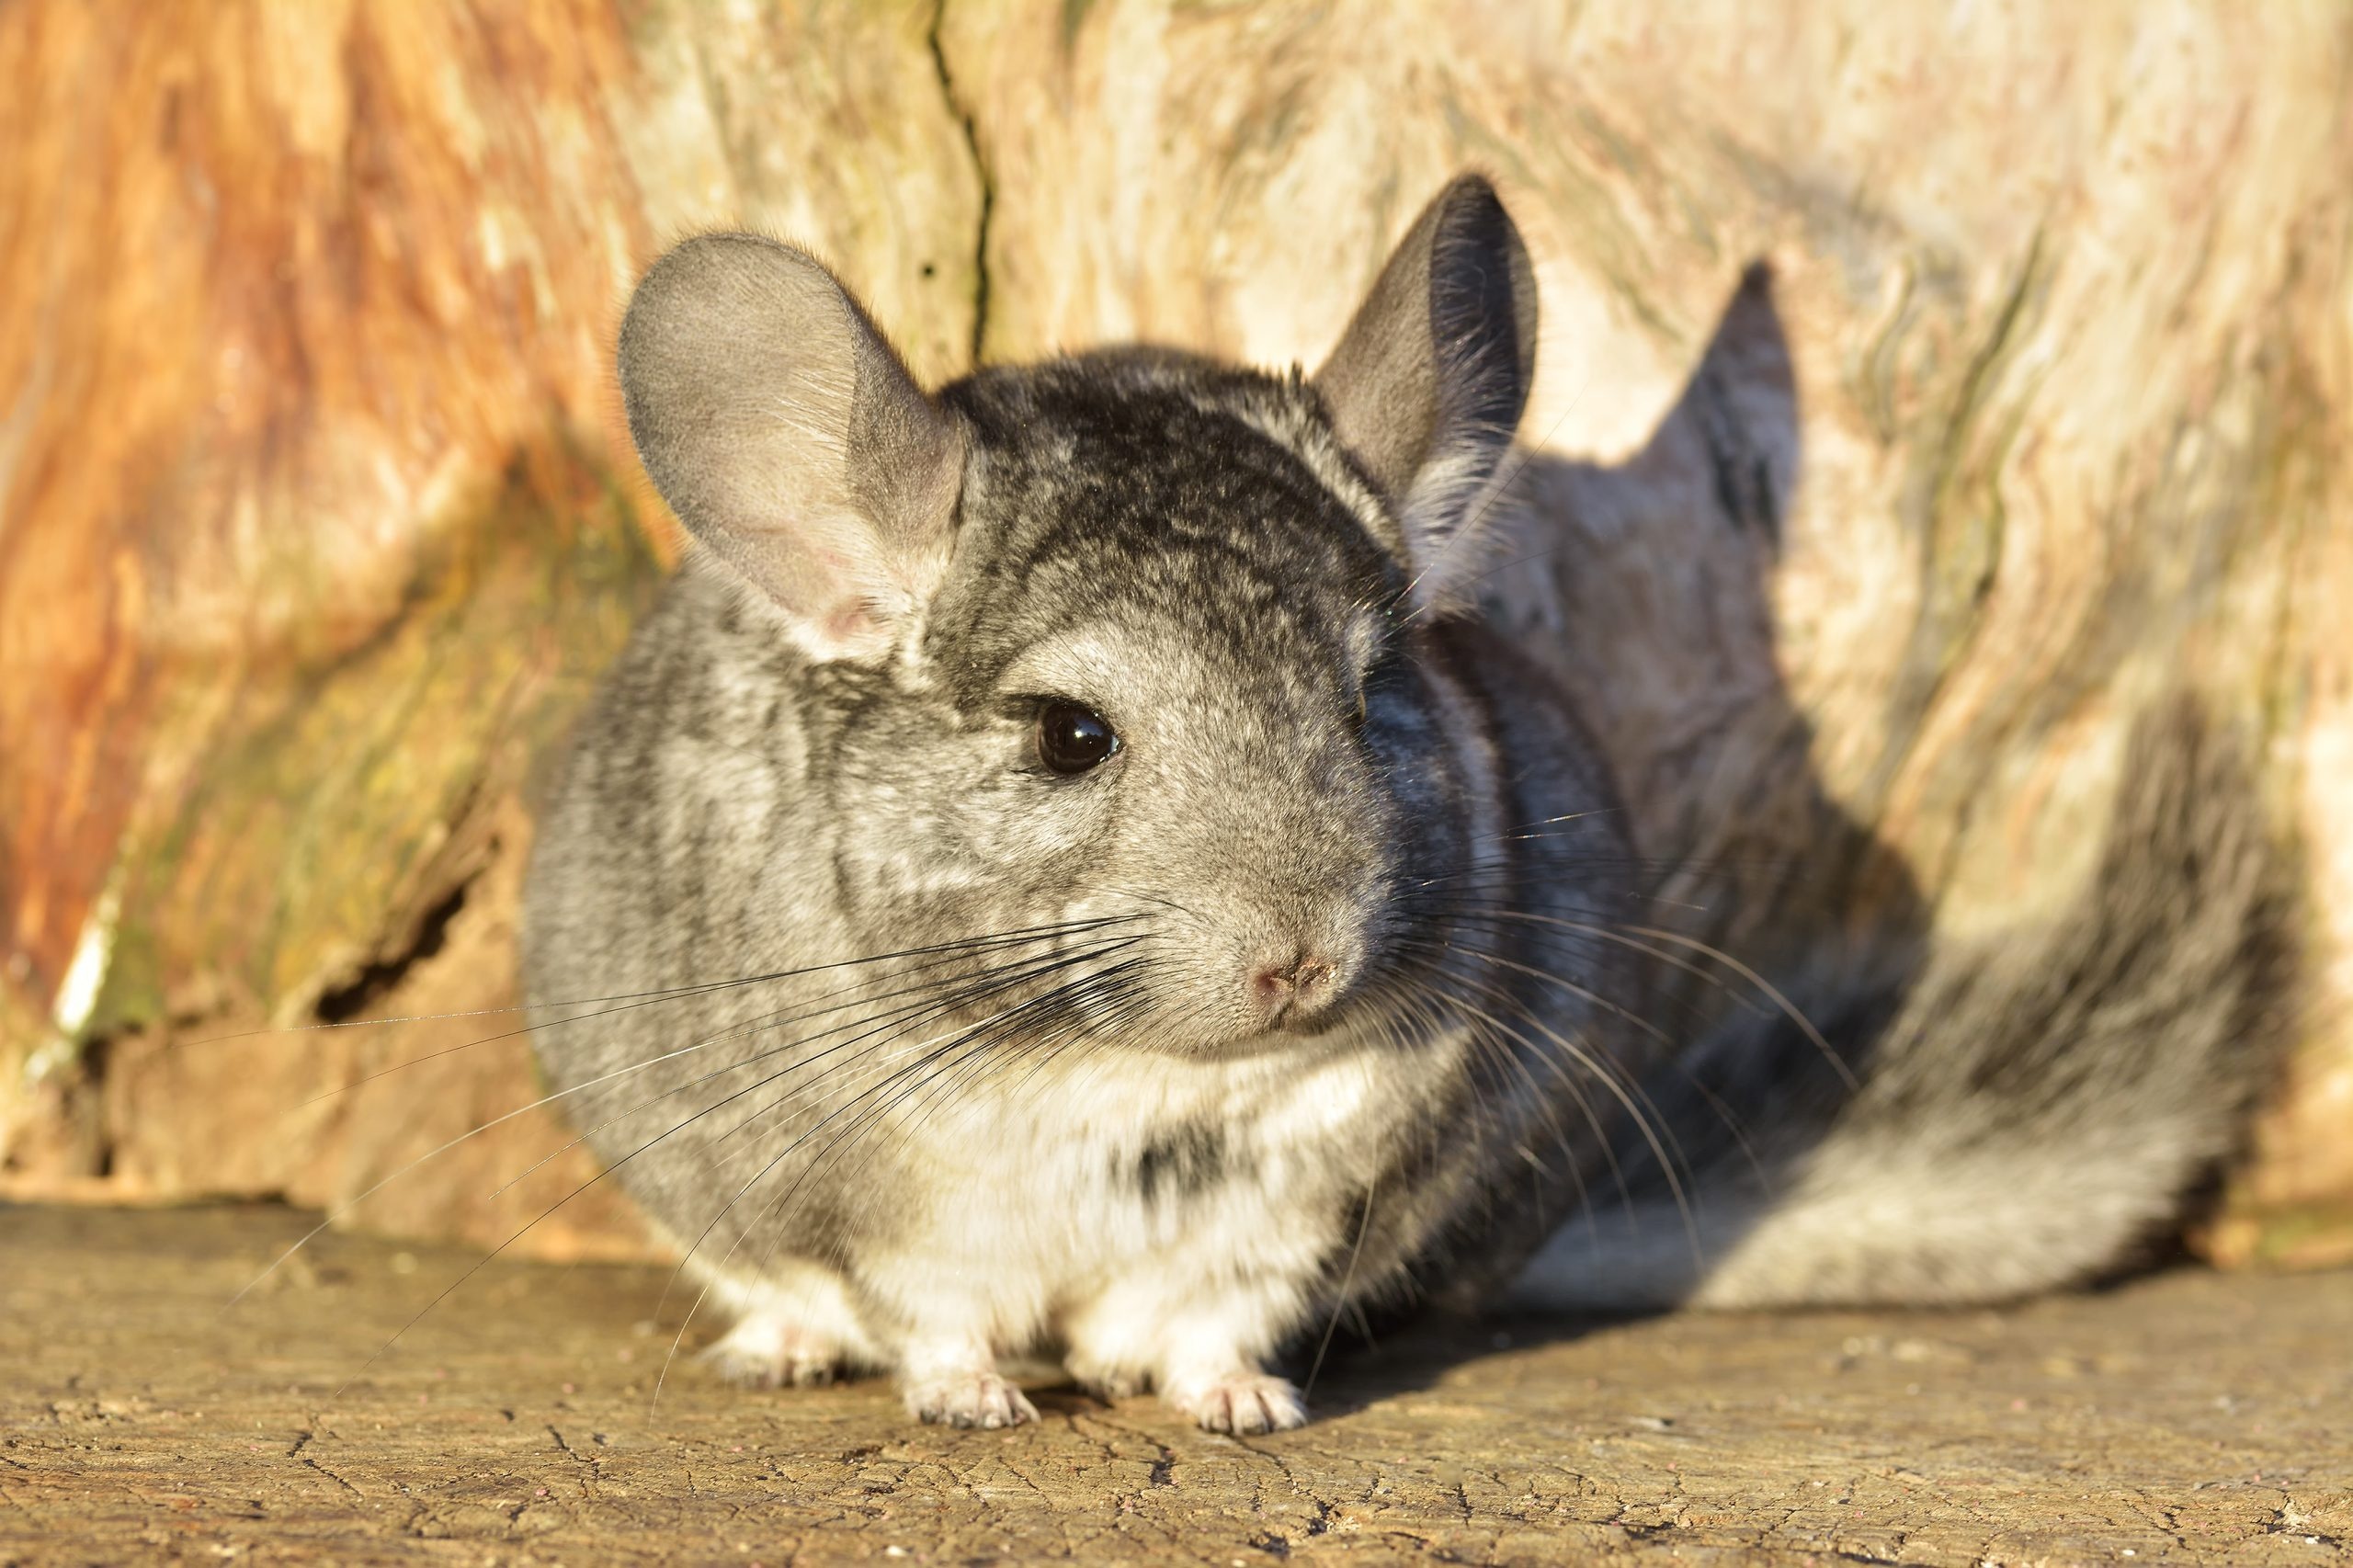 Chinchilla pictures, Adorable pet, Small and fluffy, Rodent companions, 2560x1710 HD Desktop